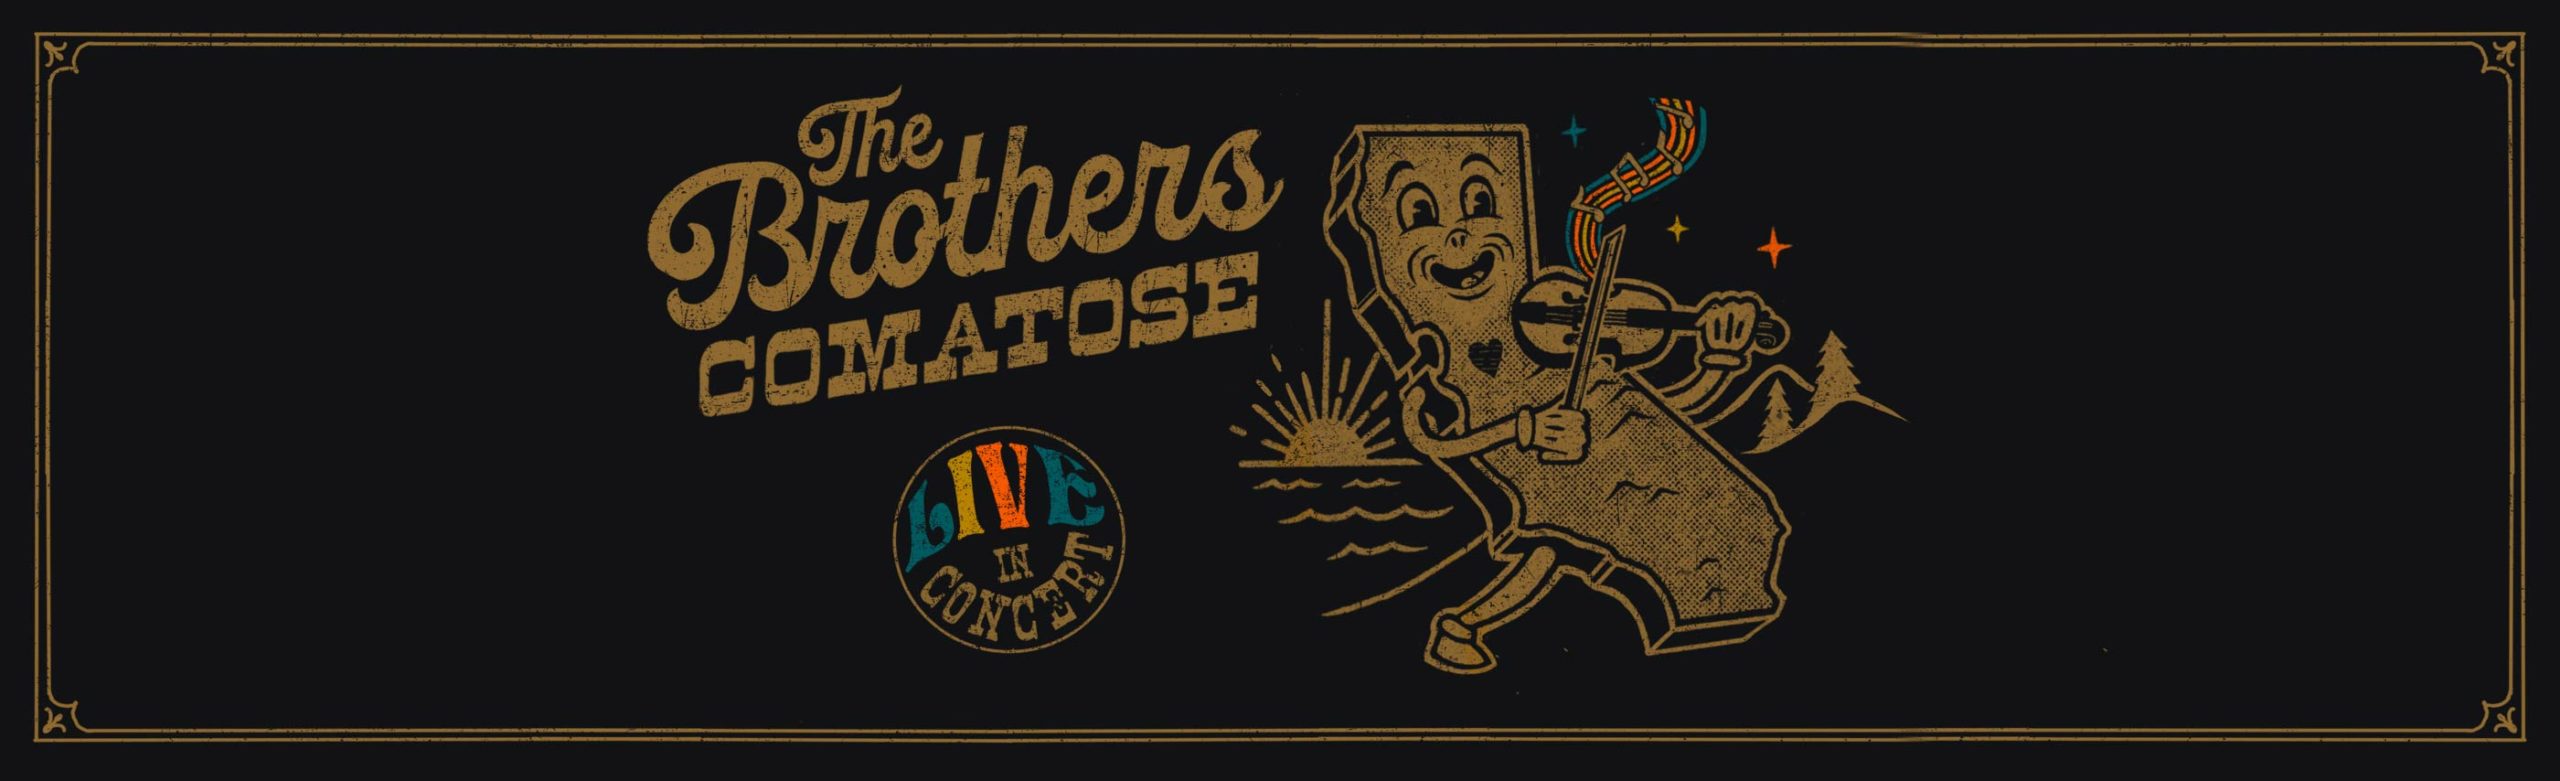 Event Info: The Brothers Comatose at The ELM 2022 Image